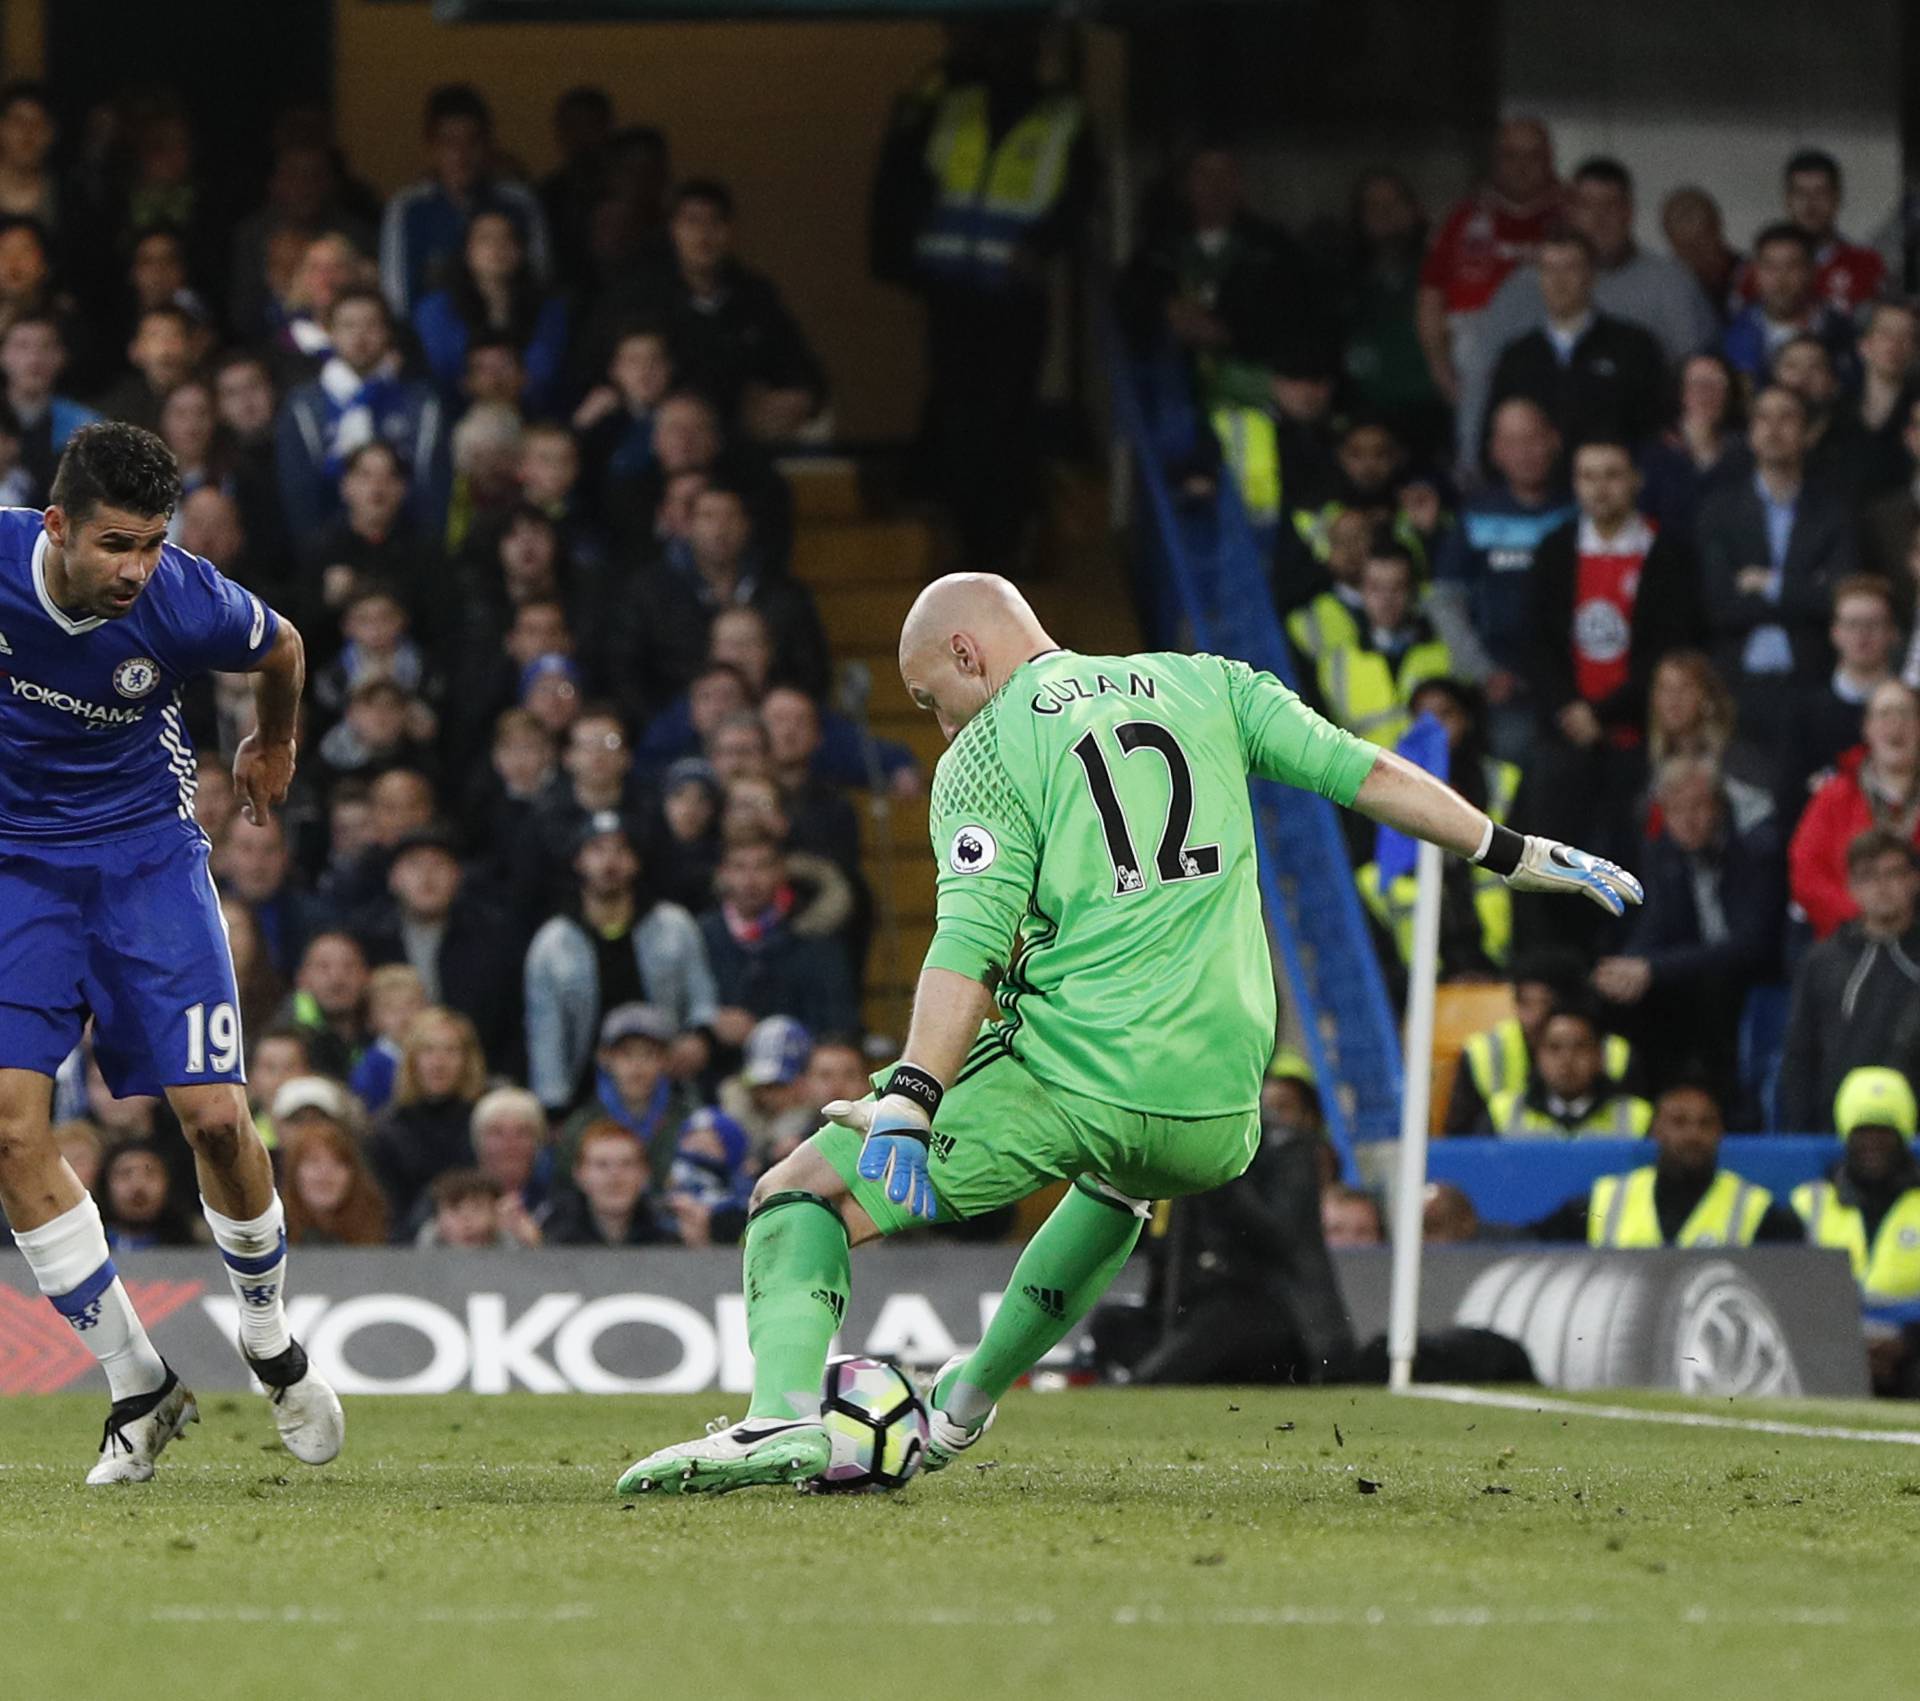 Chelsea's Diego Costa scores their first goal